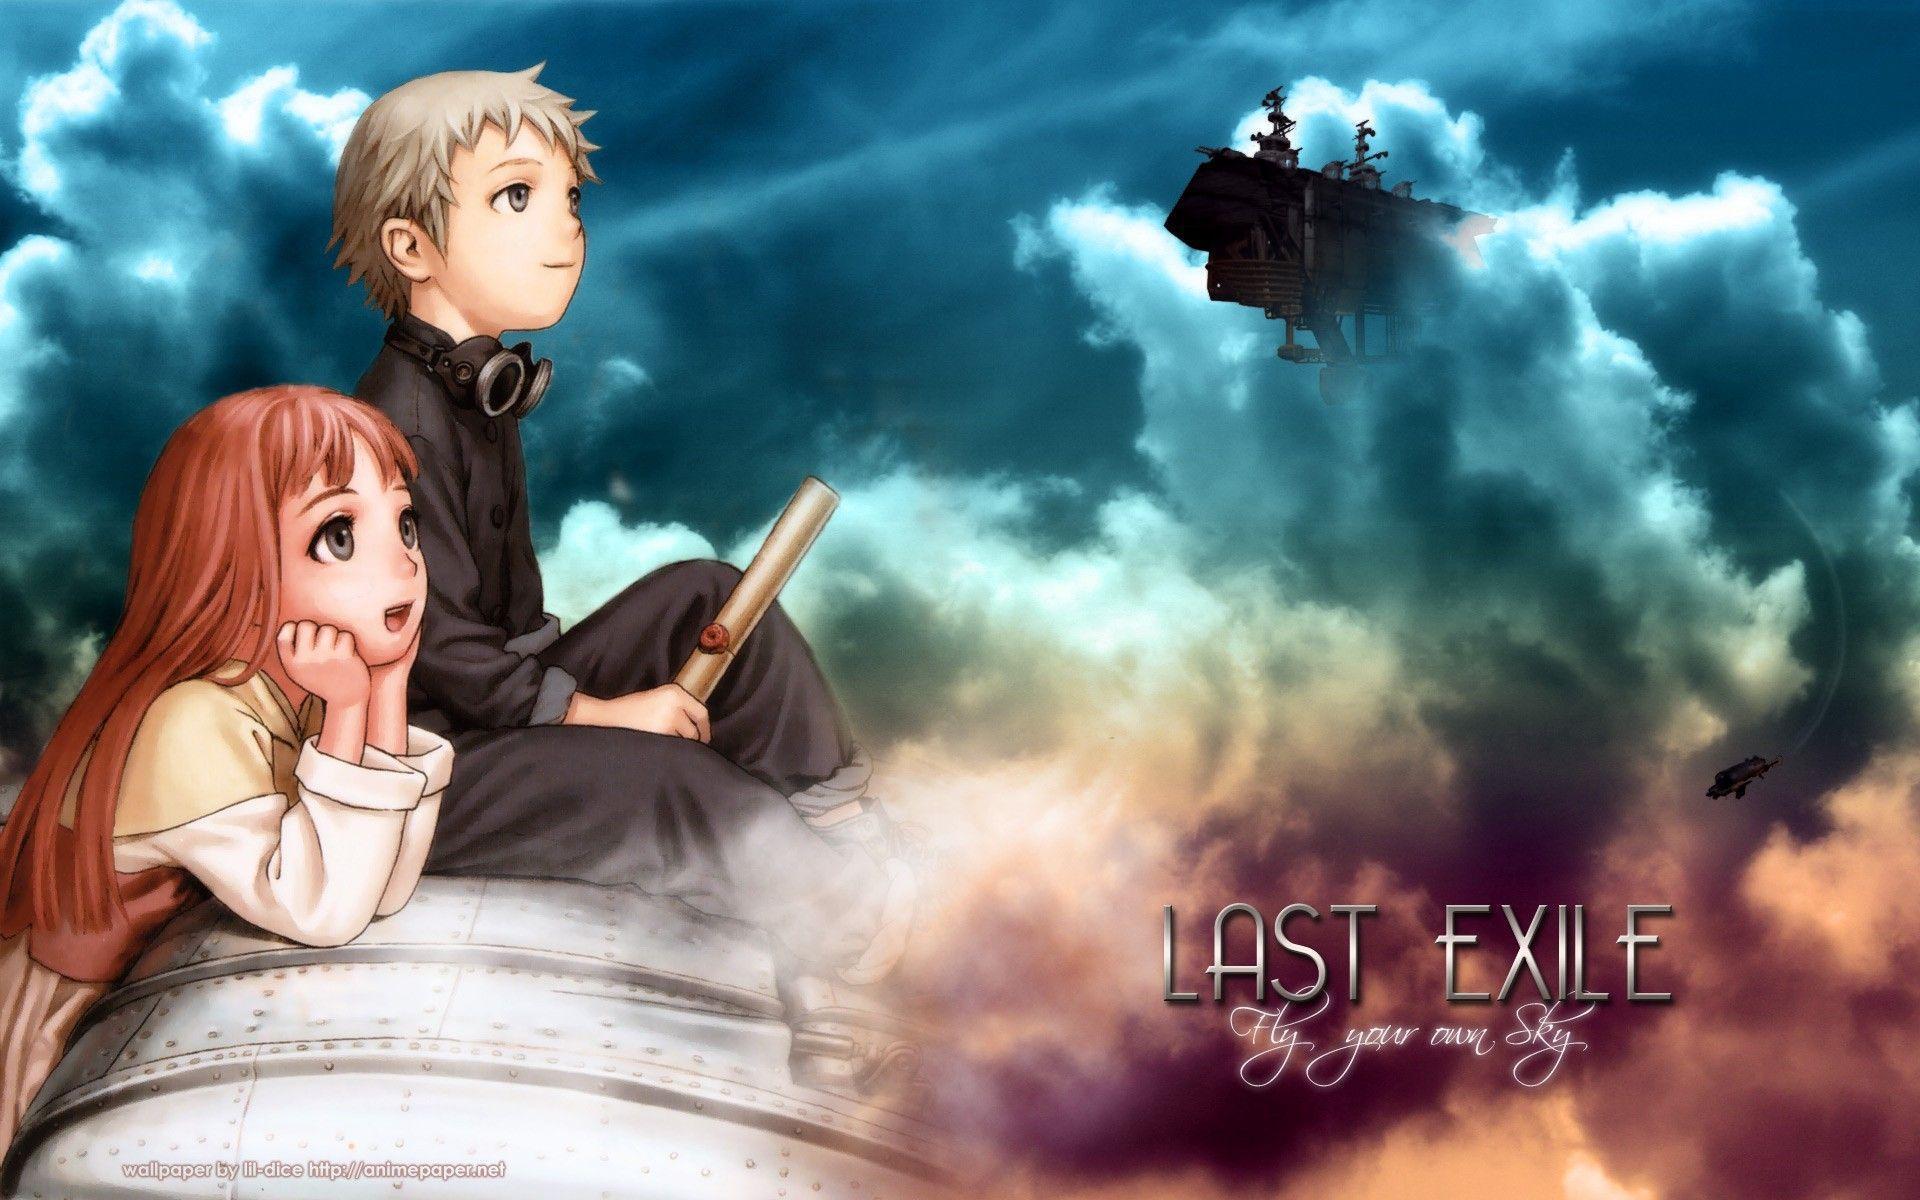 Last Exile: Fam, The Silver Wing (TV) - Anime News Network